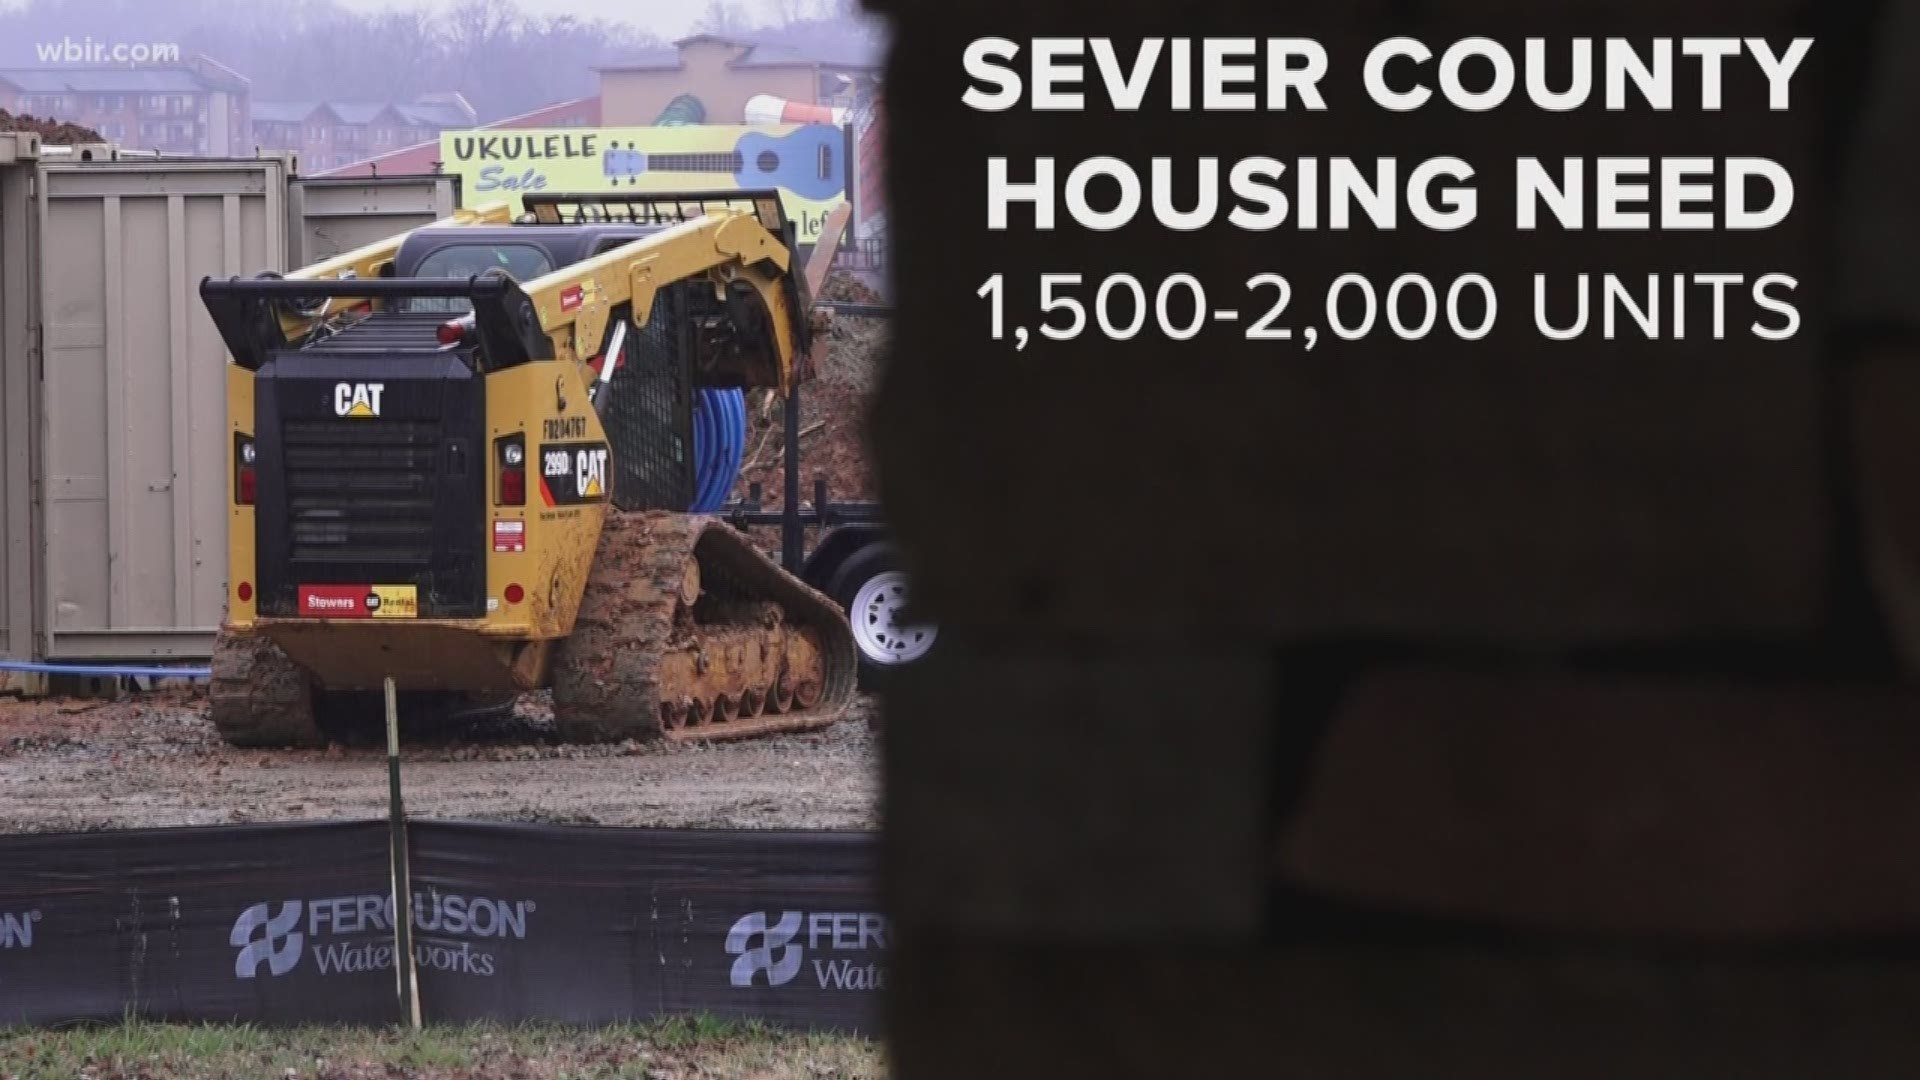 County leaders say they'll have about 1,200 new units available between 2019 and 2020.